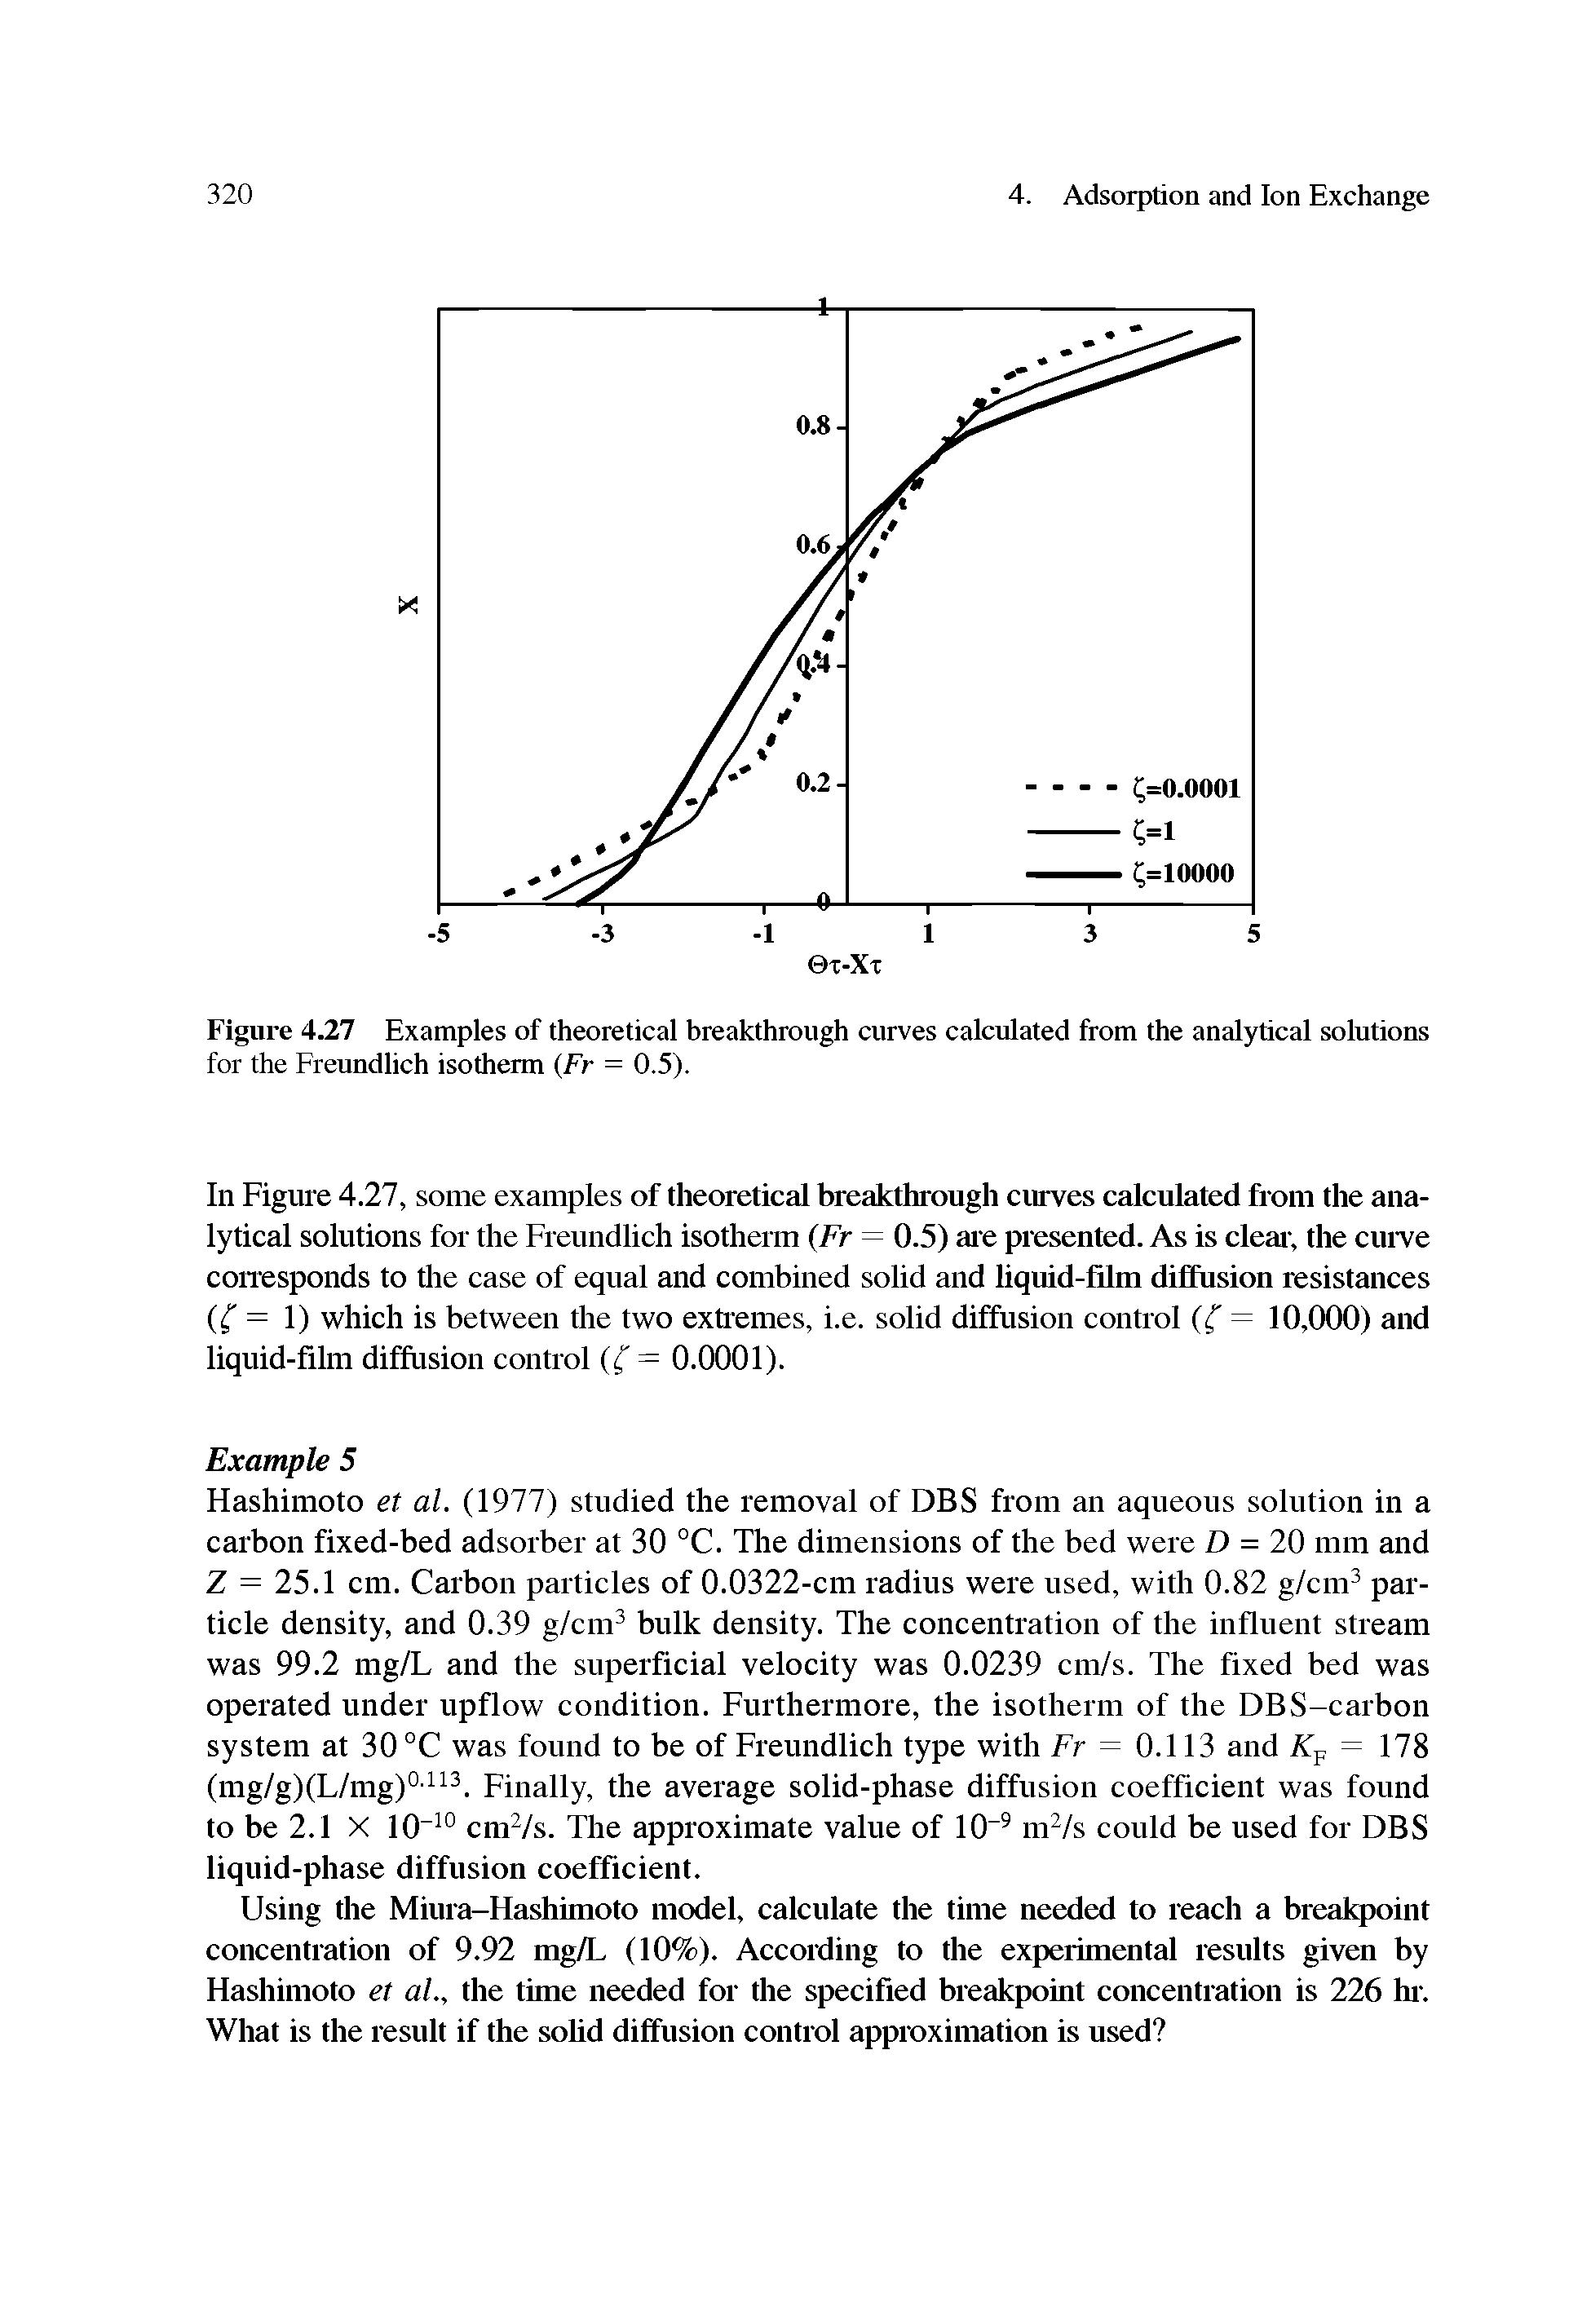 Figure 4.27 Examples of theoretical breakthrough curves calculated from the analytical solutions for the Freundlich isotherm (Fr = 0.5).